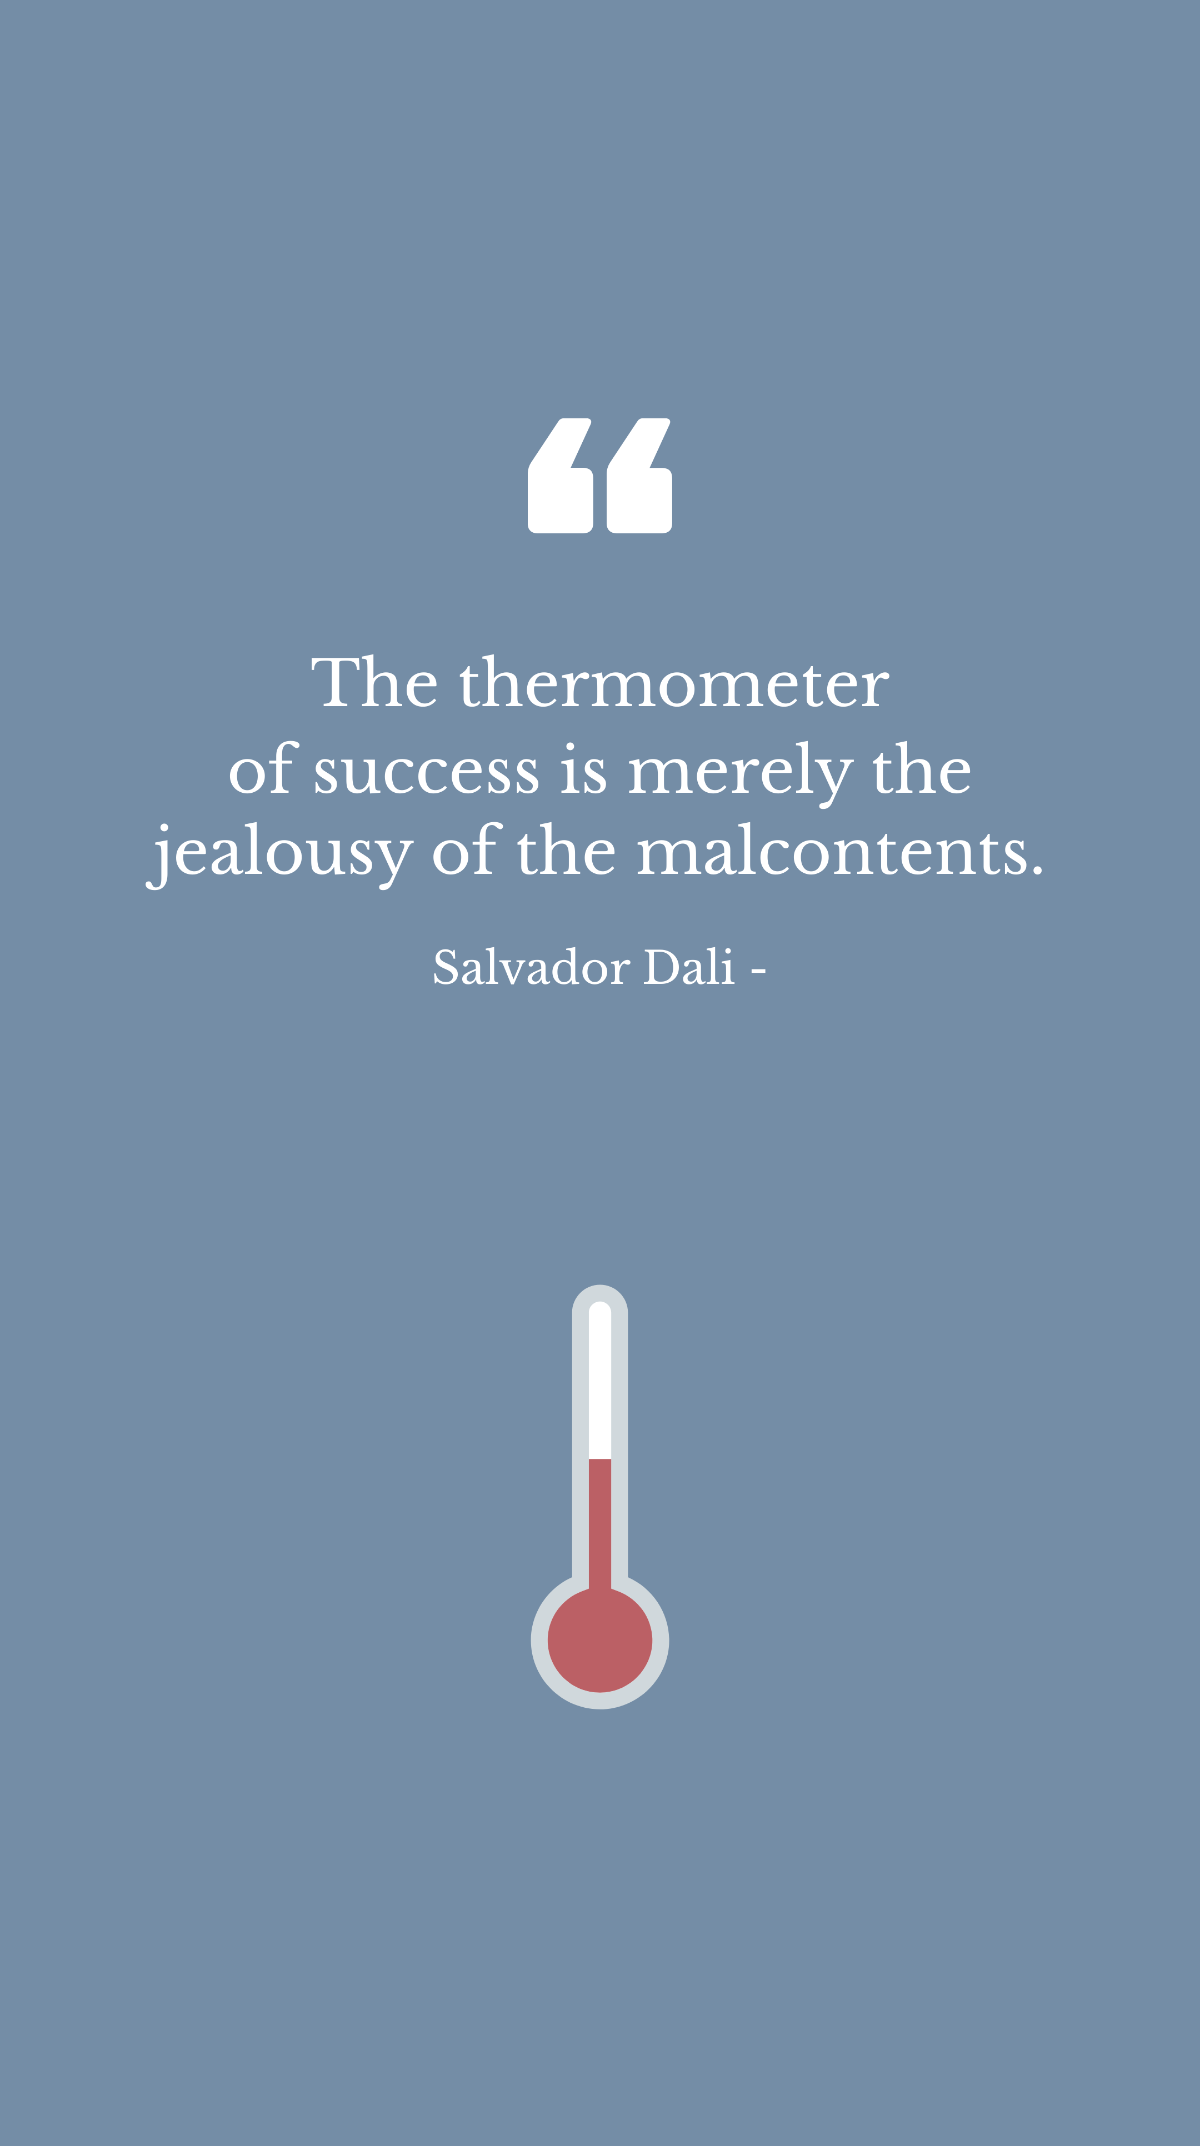 Free Salvador Dali - The thermometer of success is merely the jealousy of the malcontents. Template